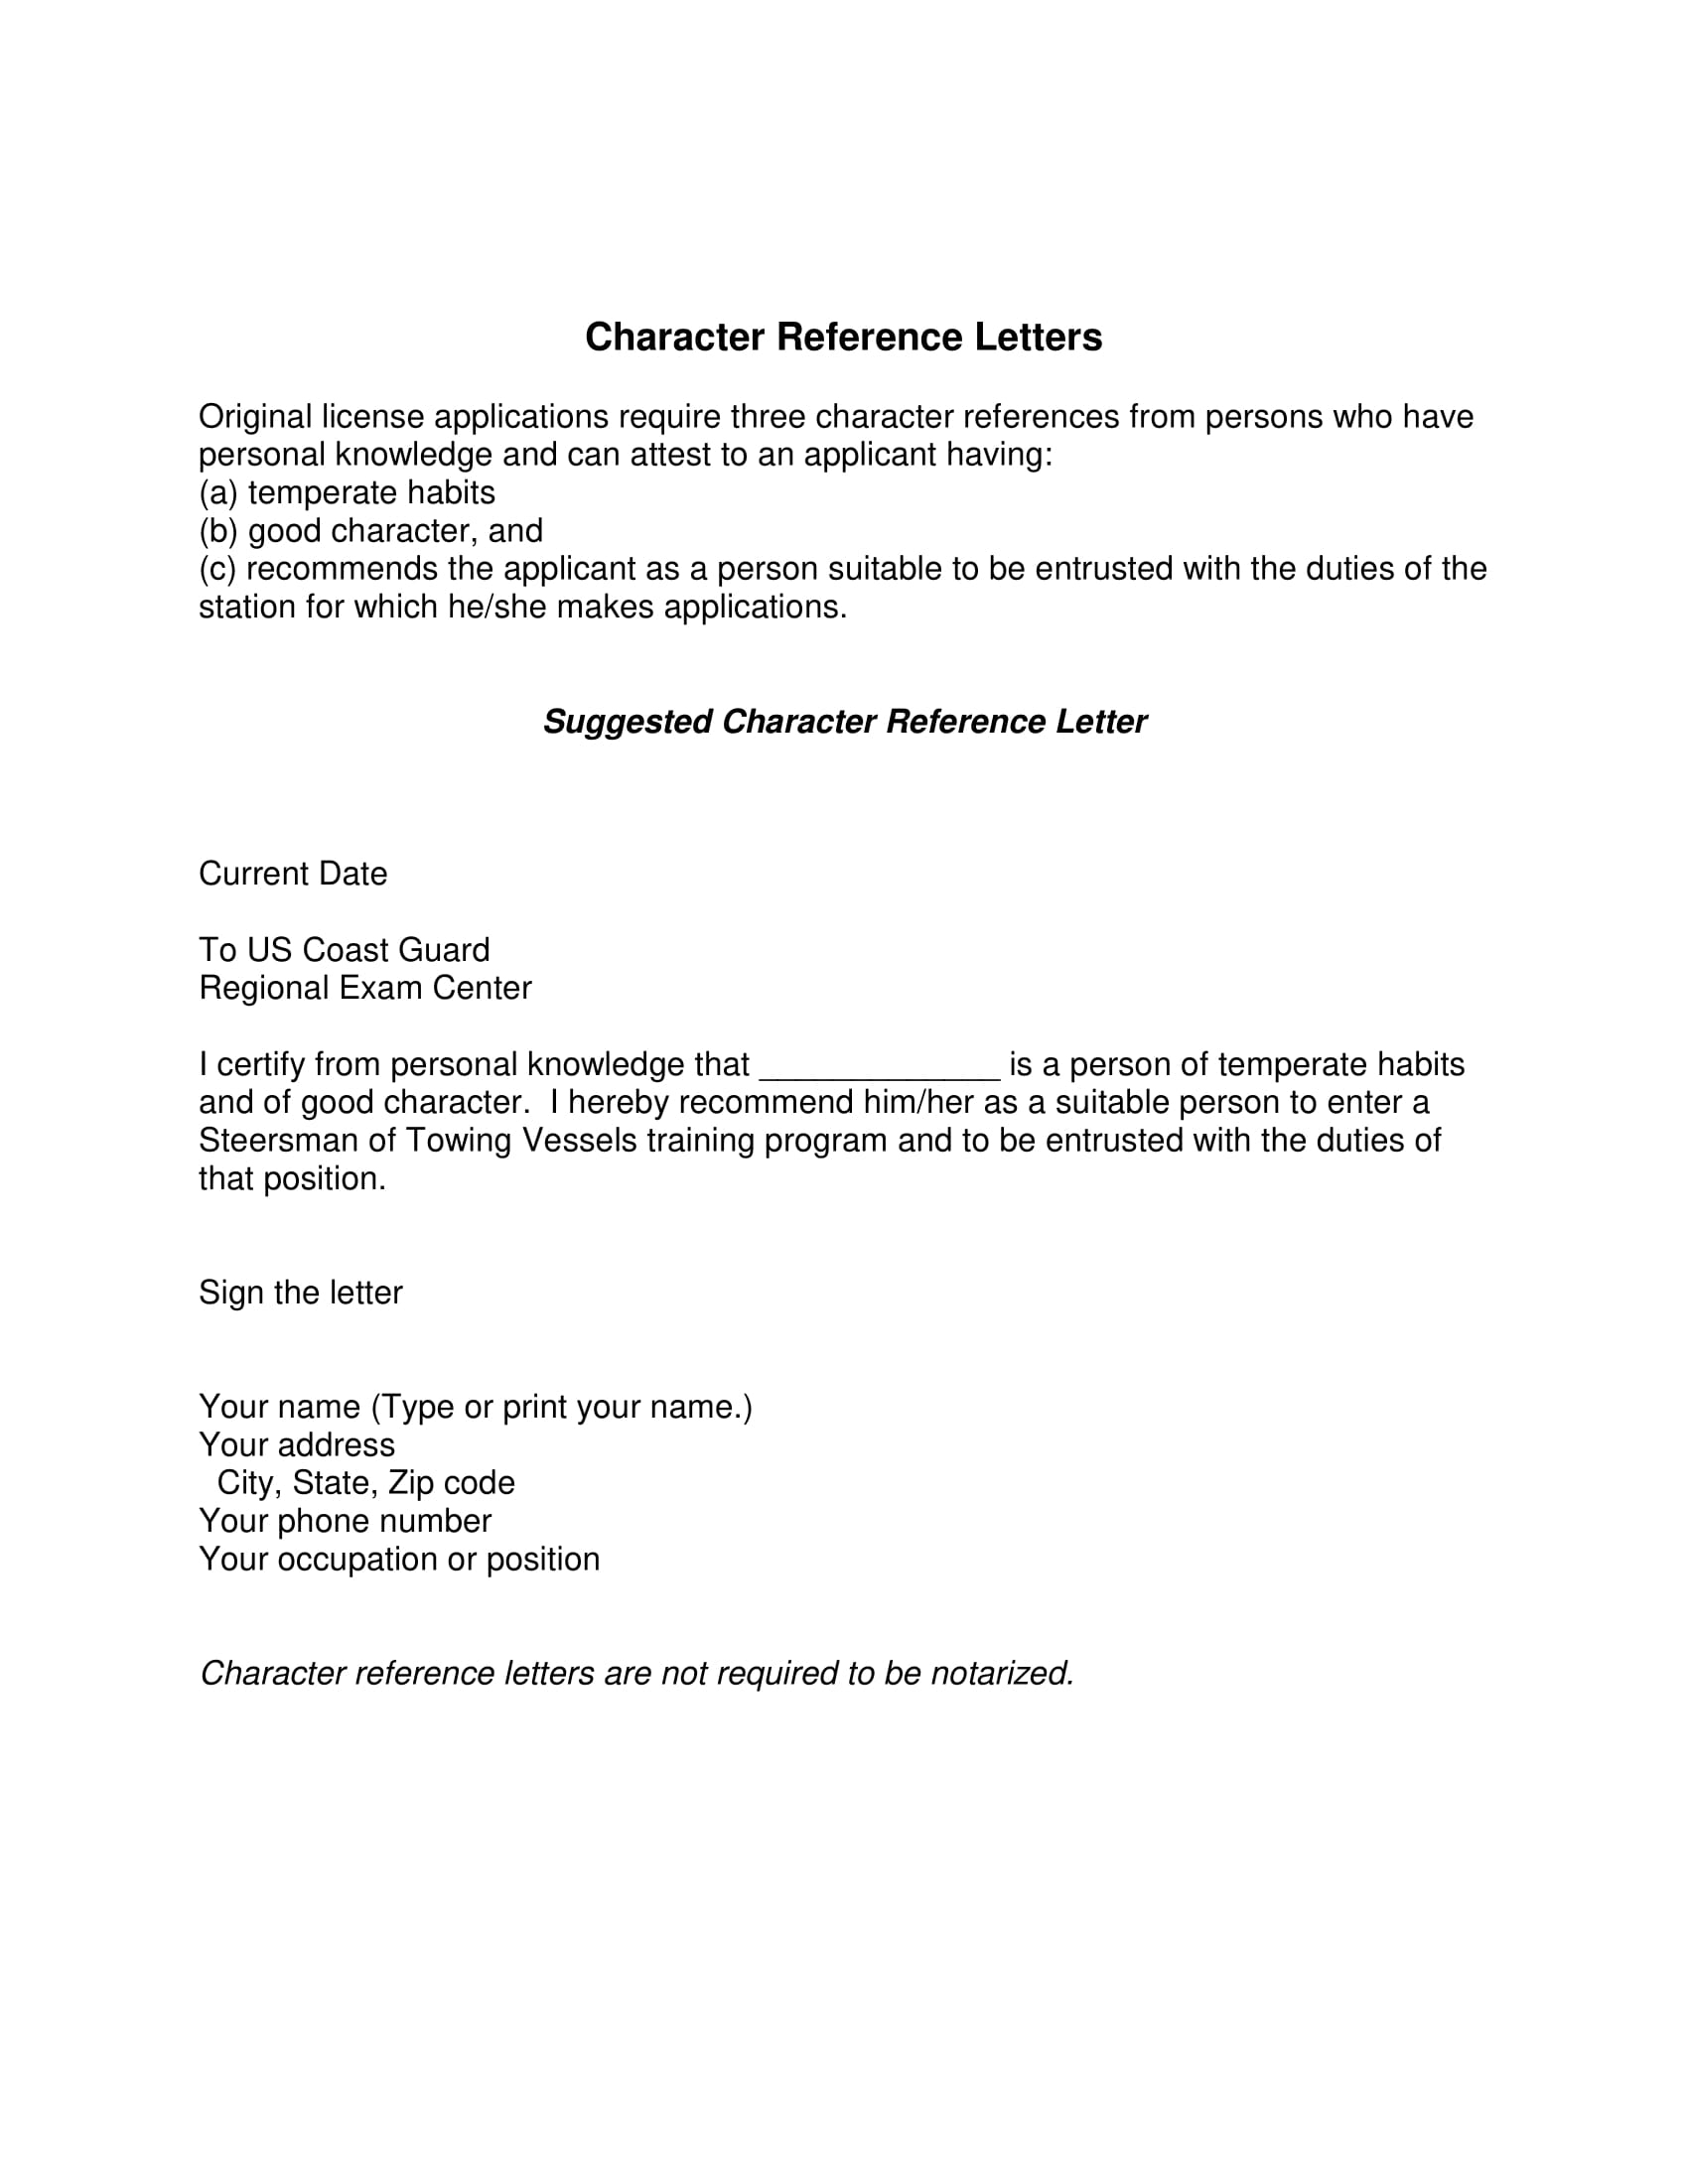 Letter of personal reference notarized